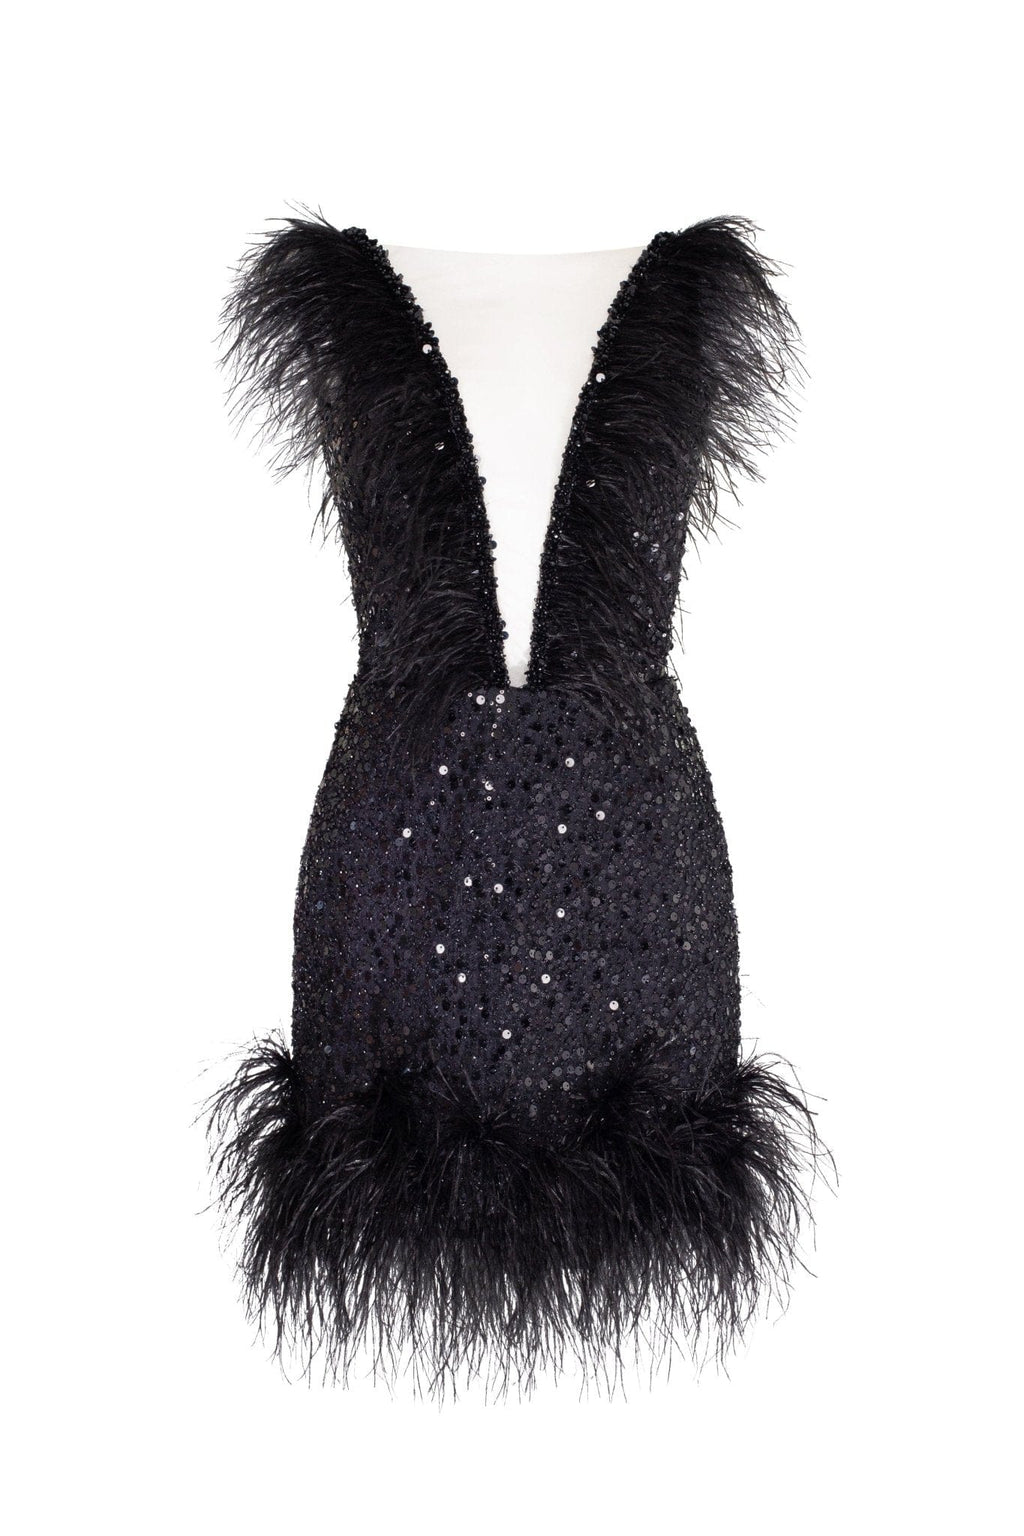 Dramatic cocktail dress on straps decorated with sequins and feathers - Milla